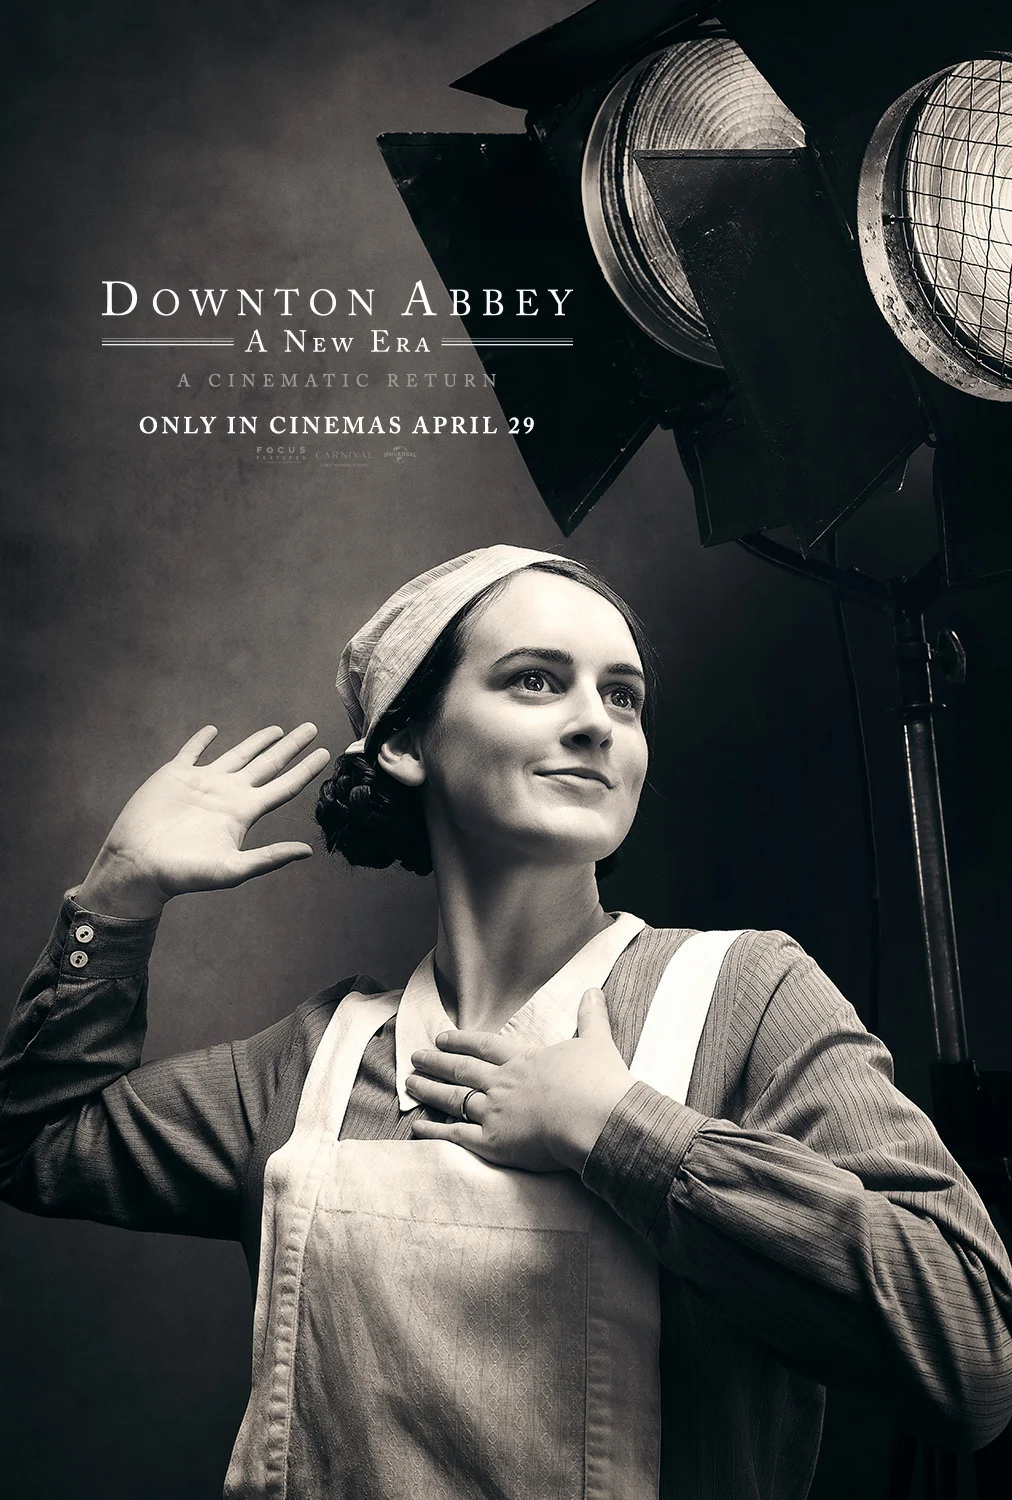 downton-abbey-a-new-era-released-character-posters-multiple-main-actors-appear-16